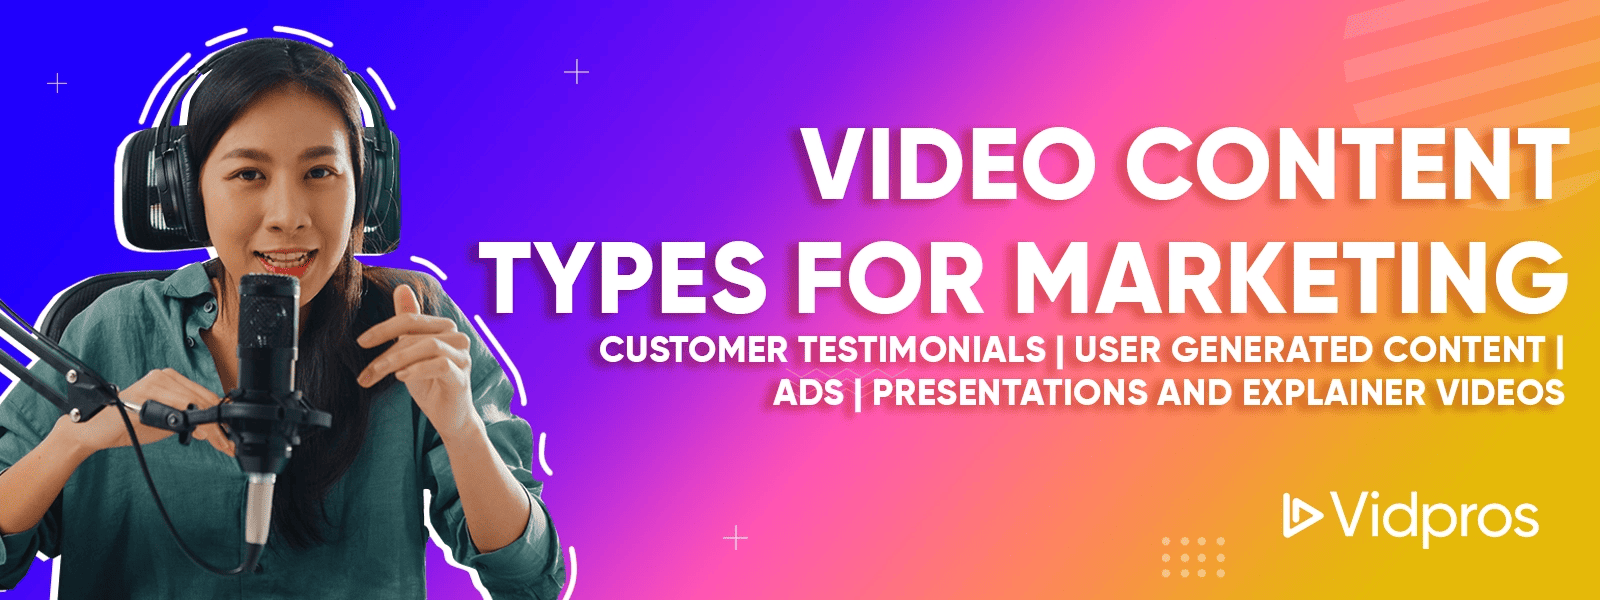 video content types